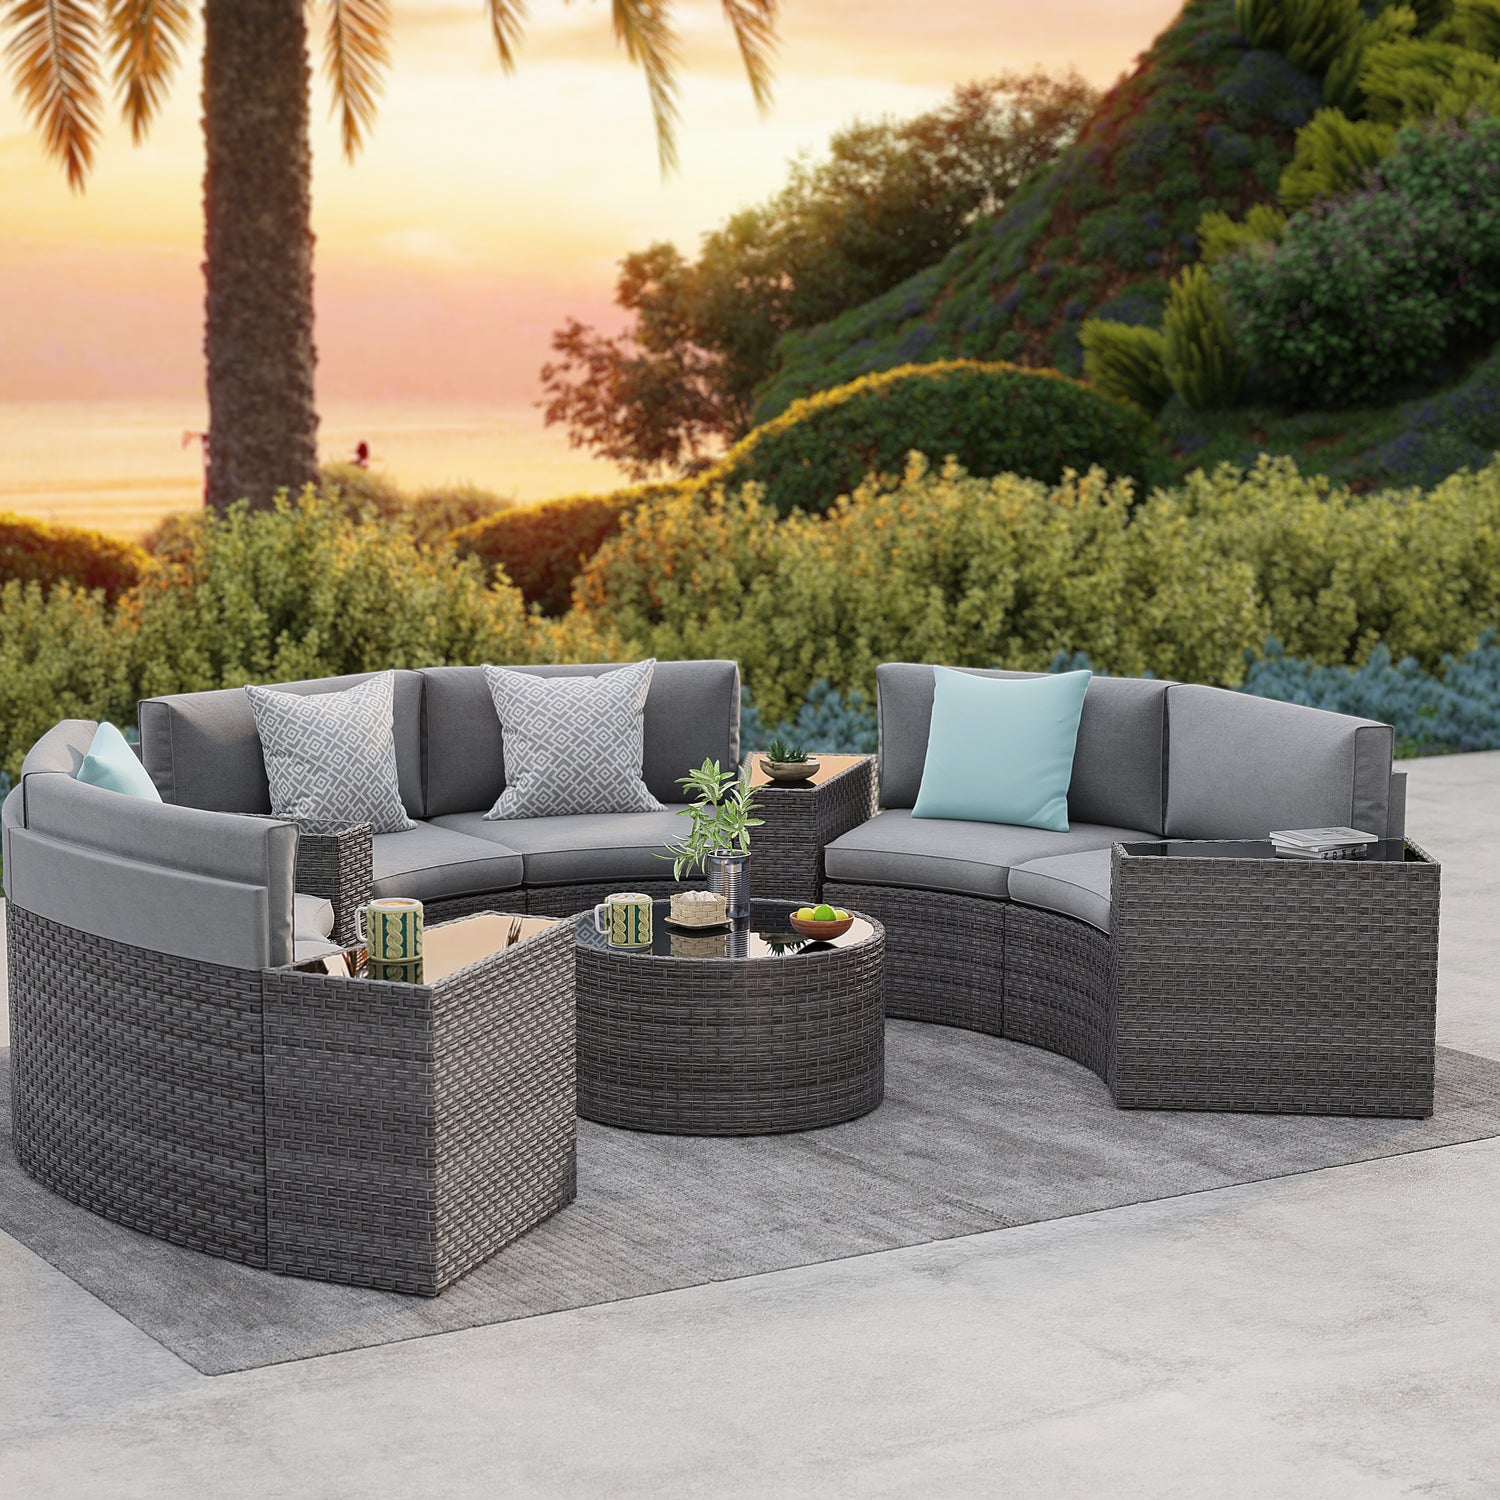 Curved Outdoor Sectionals: An Ideal Solution for Small Patios or Decks